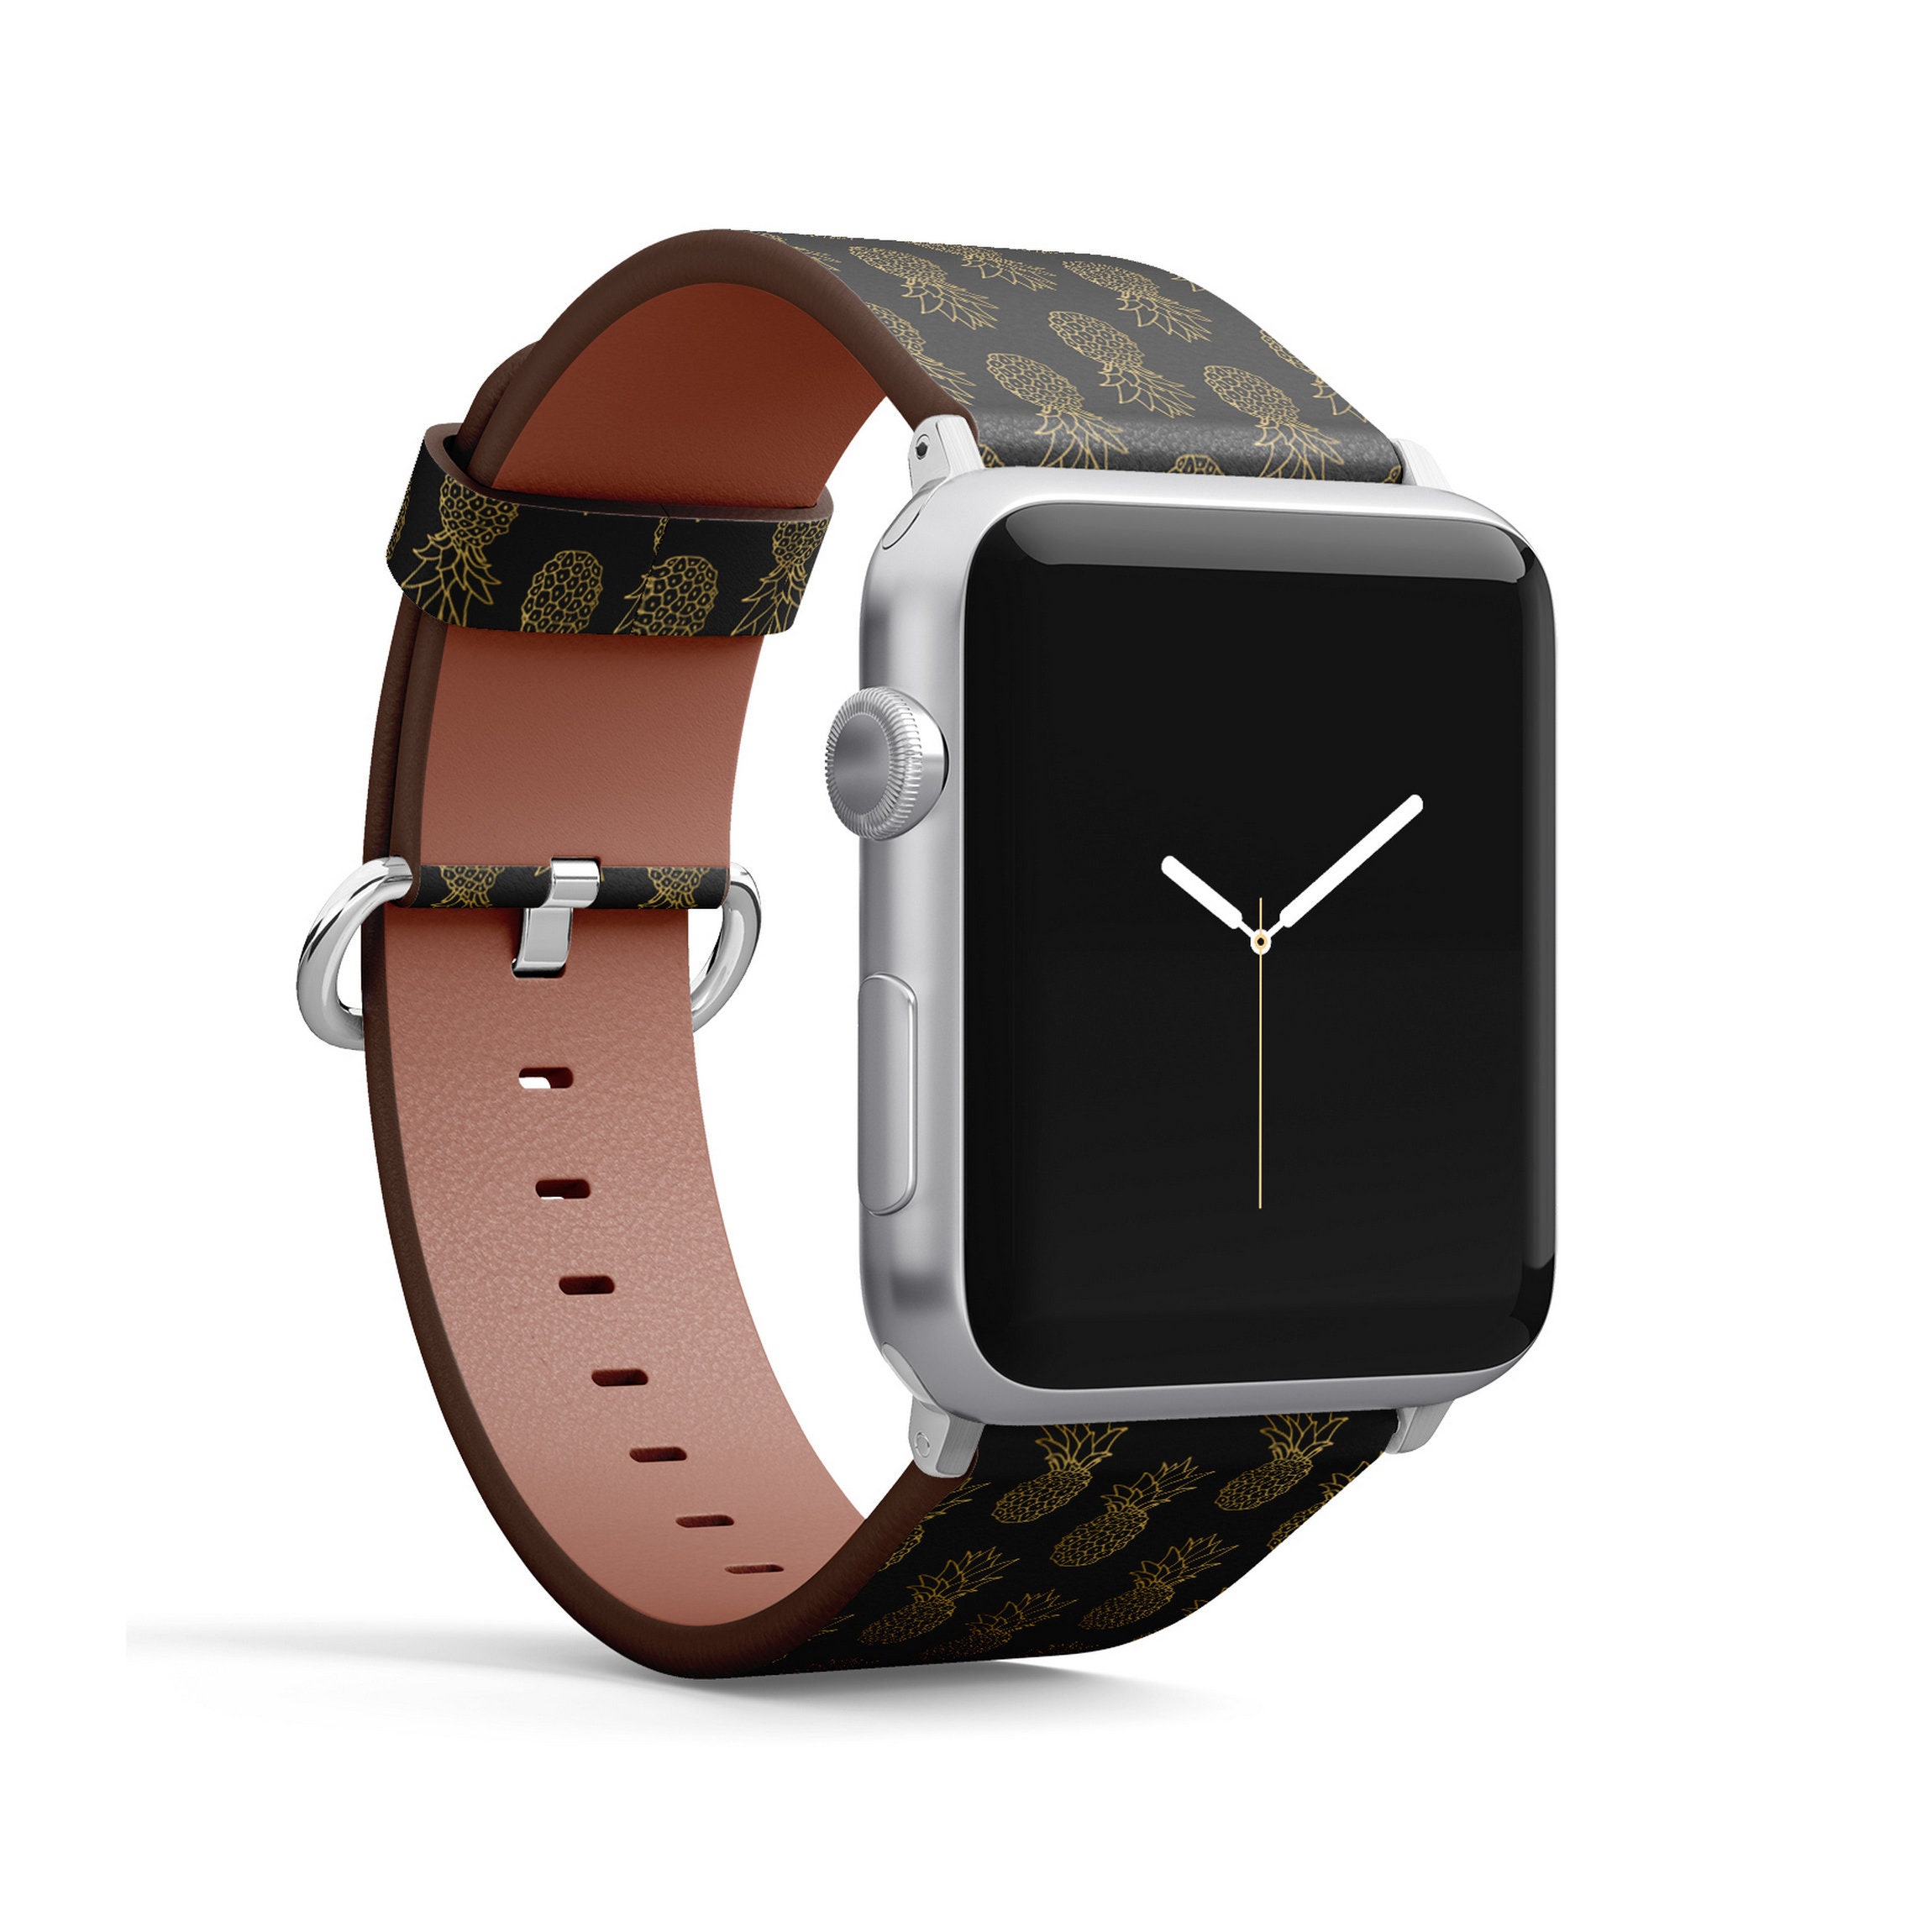 Monogram LV Vegan Leather Apple Watch Bands in 2023  Apple watch bands  leather, Apple watch bands, Watch bands